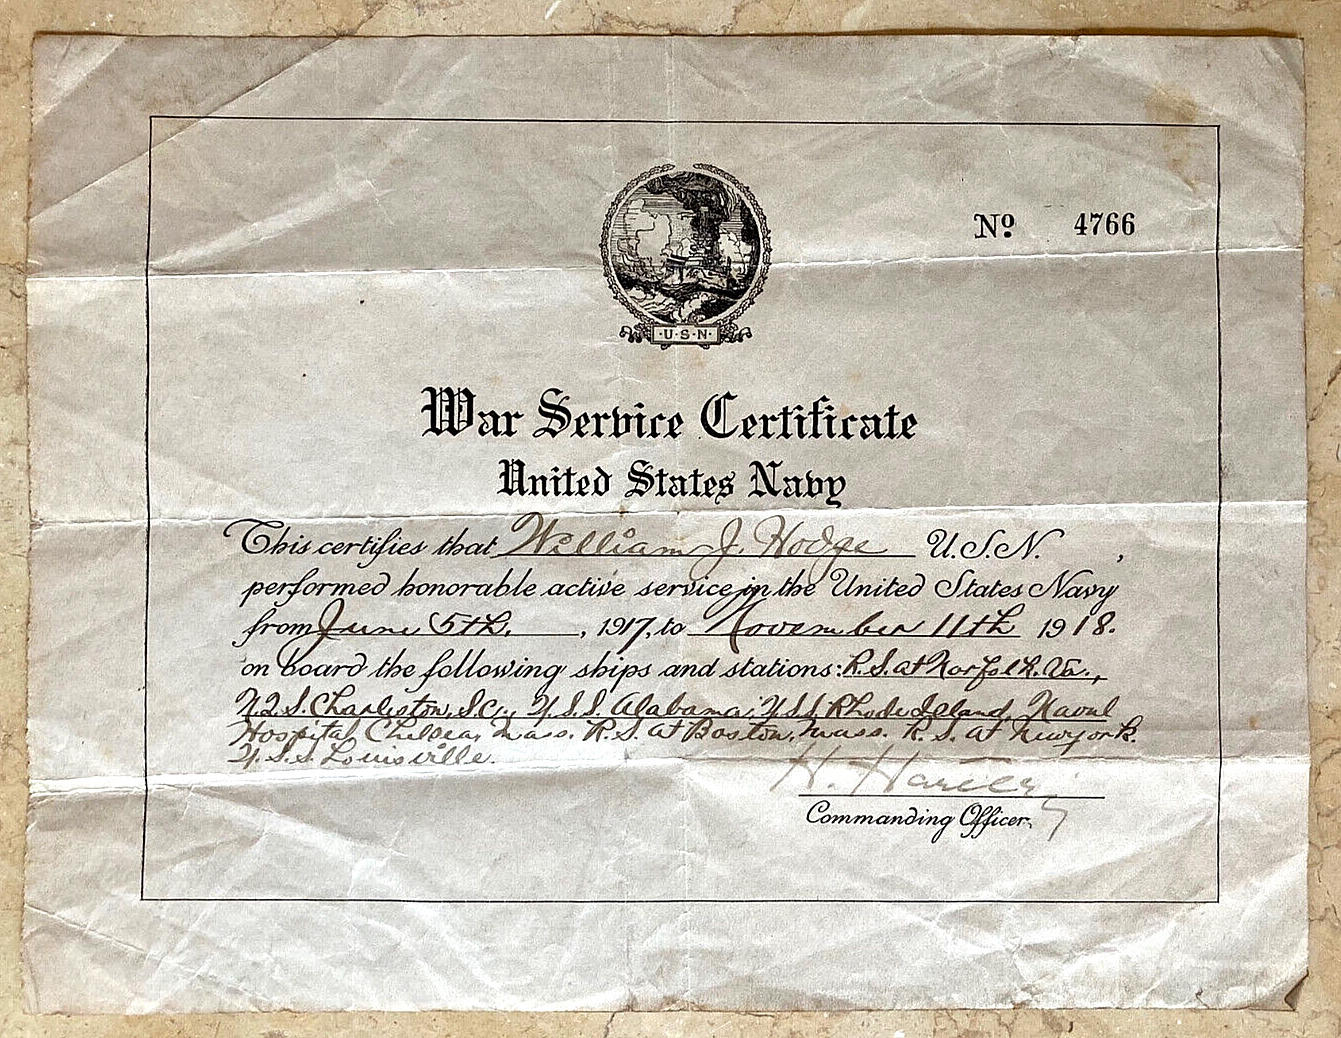 WWI US MARINE CORPS - MARINE'S WAR SERVICE CERTIFICATE from UNITED STATES NAVY